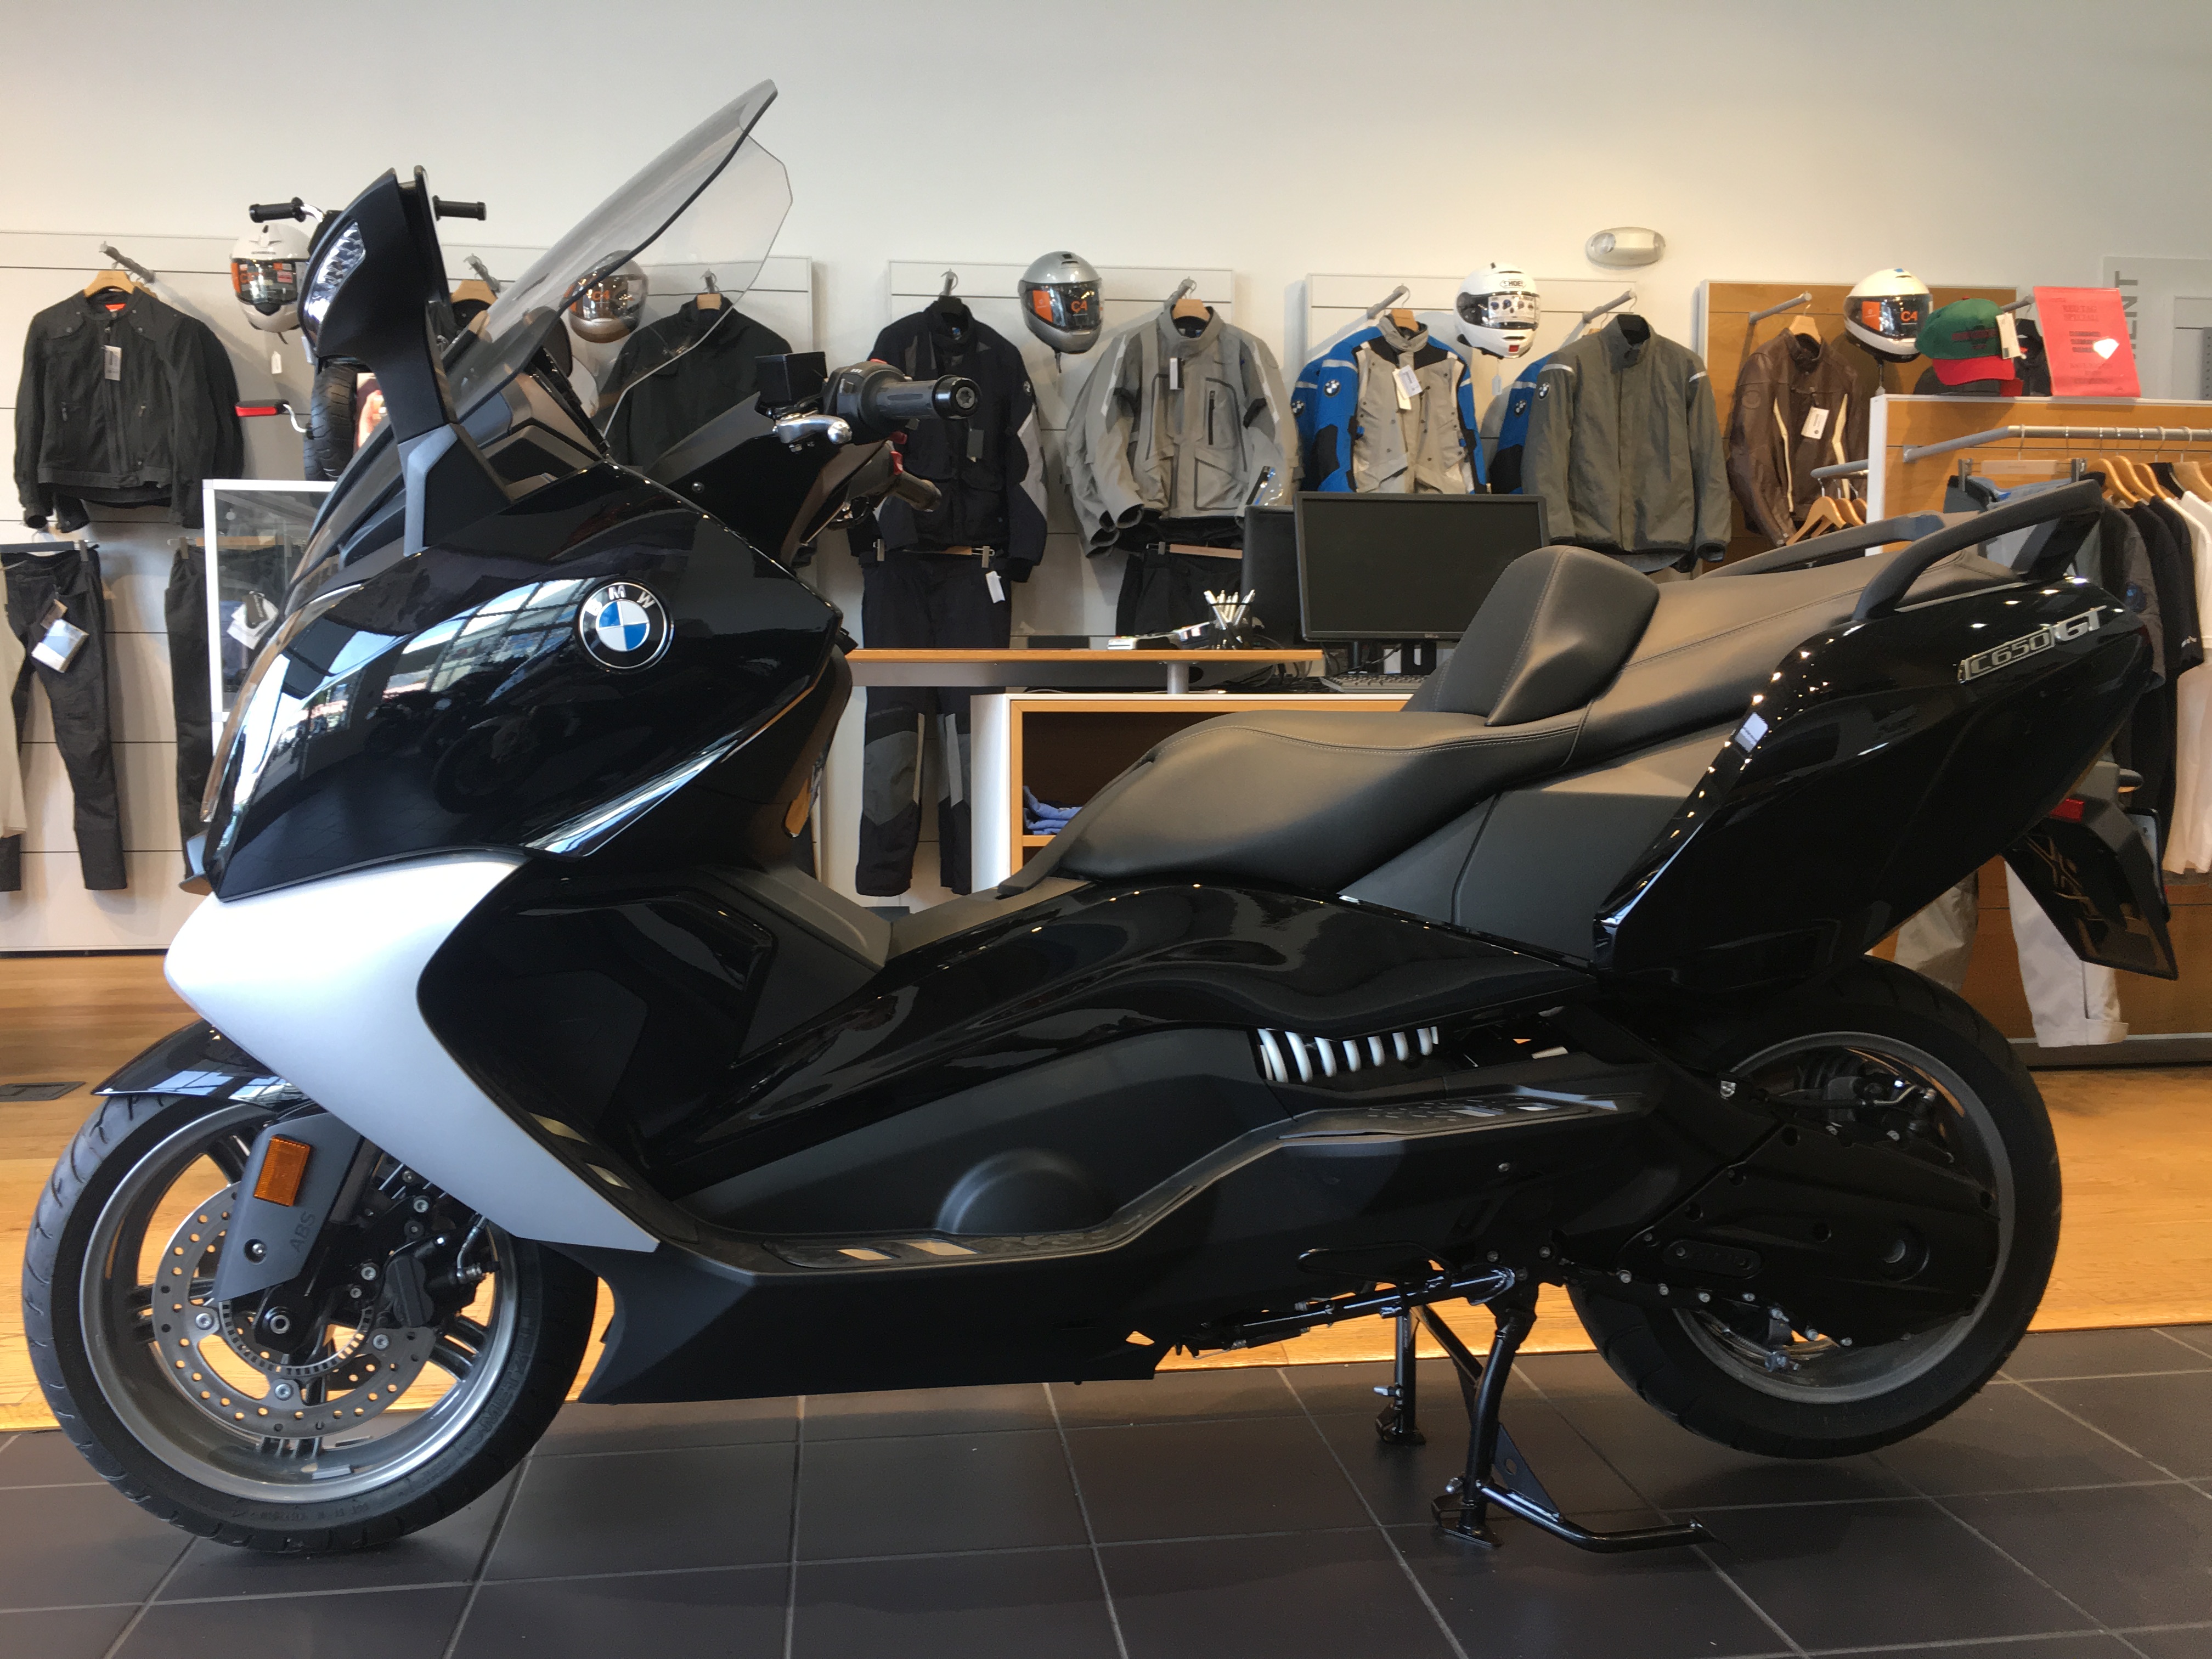 New Motorcycle Inventory - C650GT - Sandia BMW Motorcycles